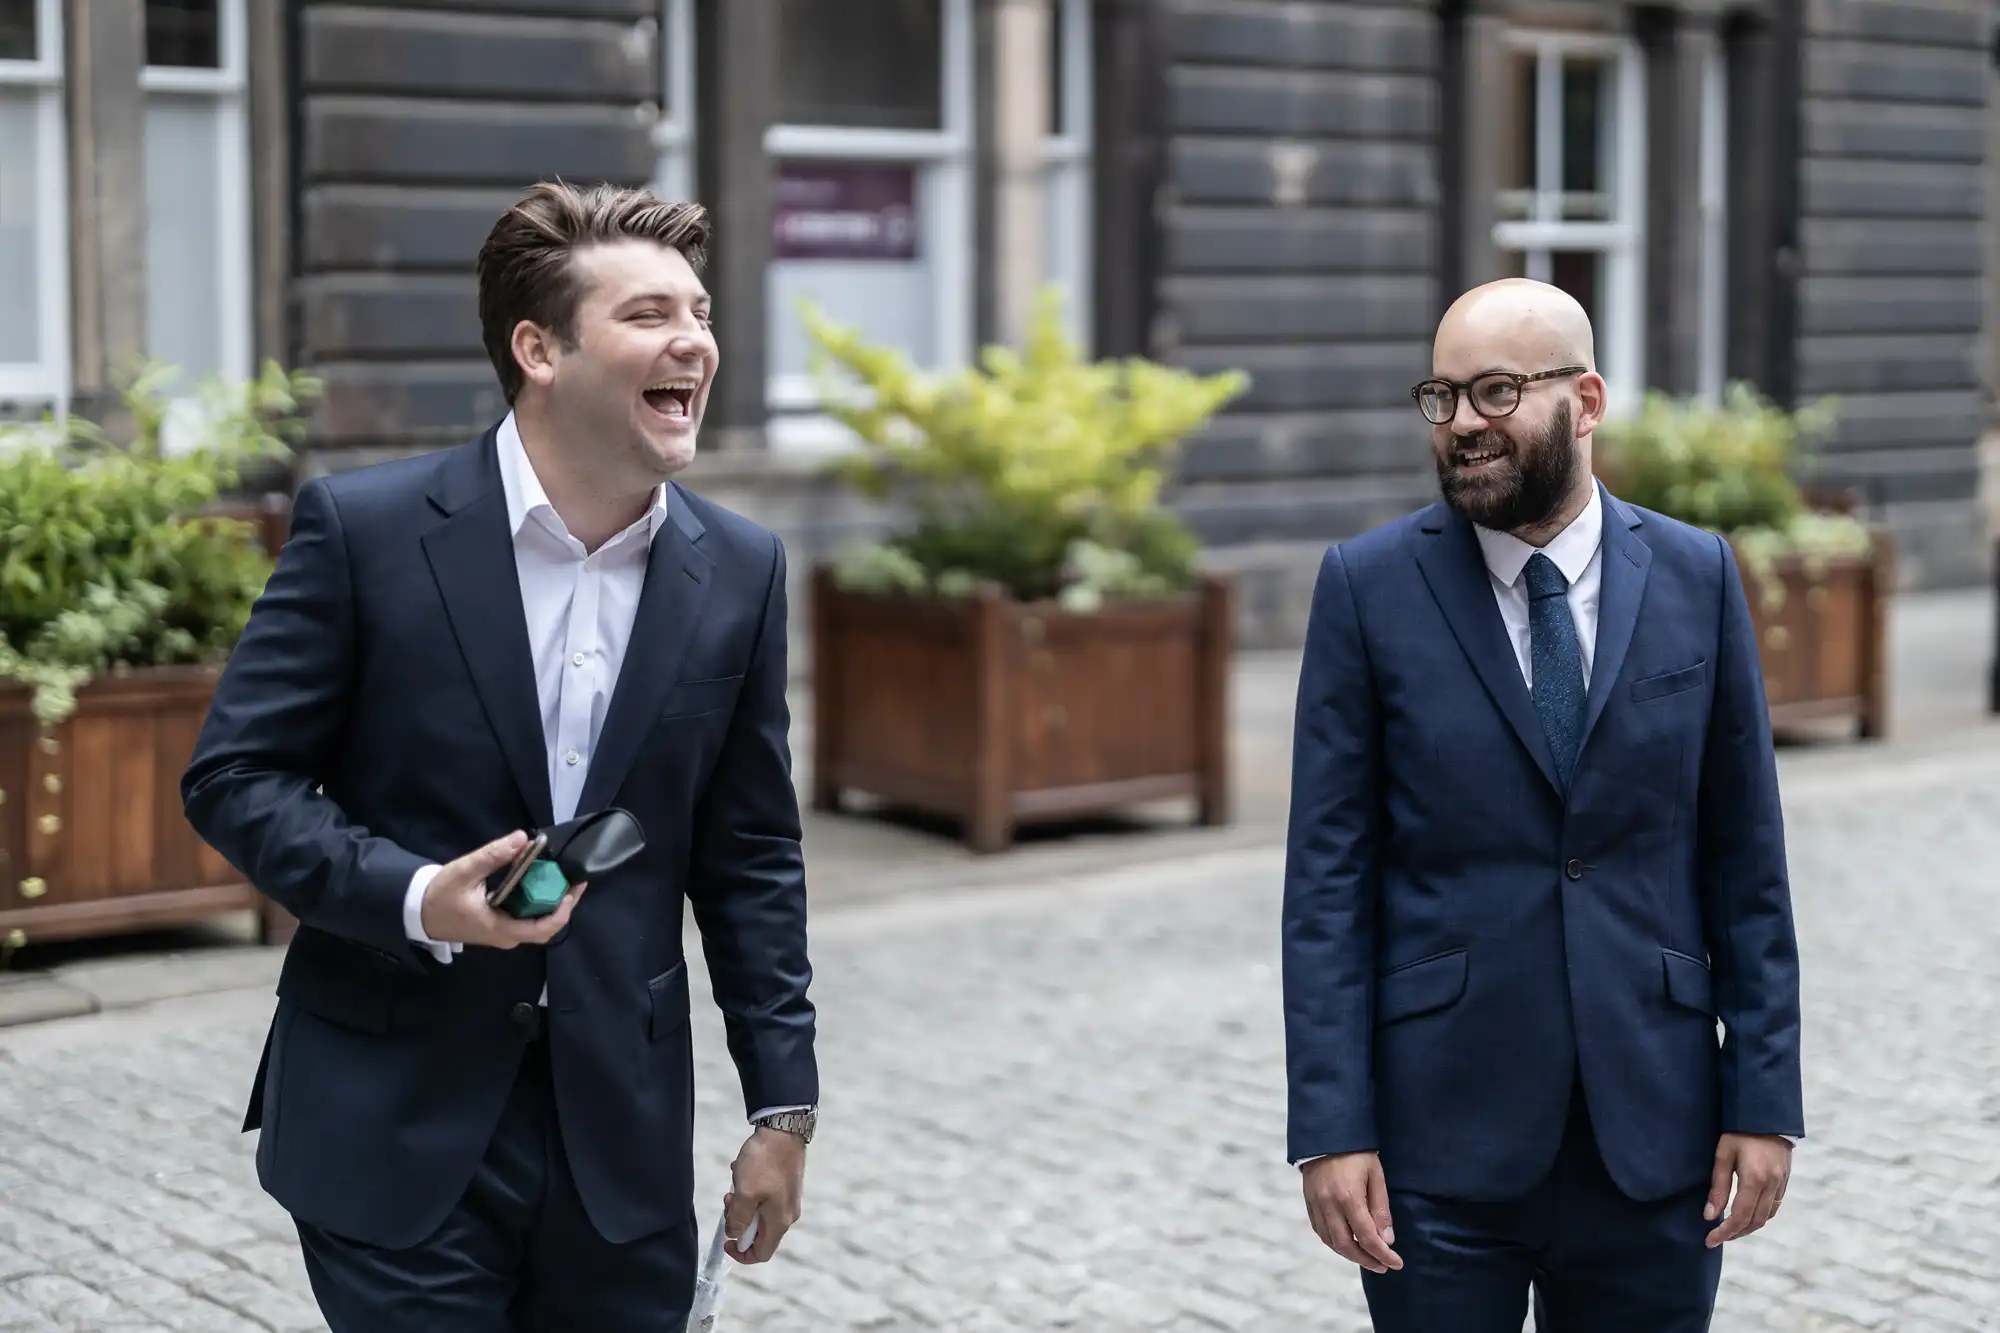 Two men in business suits walking outdoors, one laughing heartily and holding a smartphone, the other smiling and bald, in a quaint urban setting.